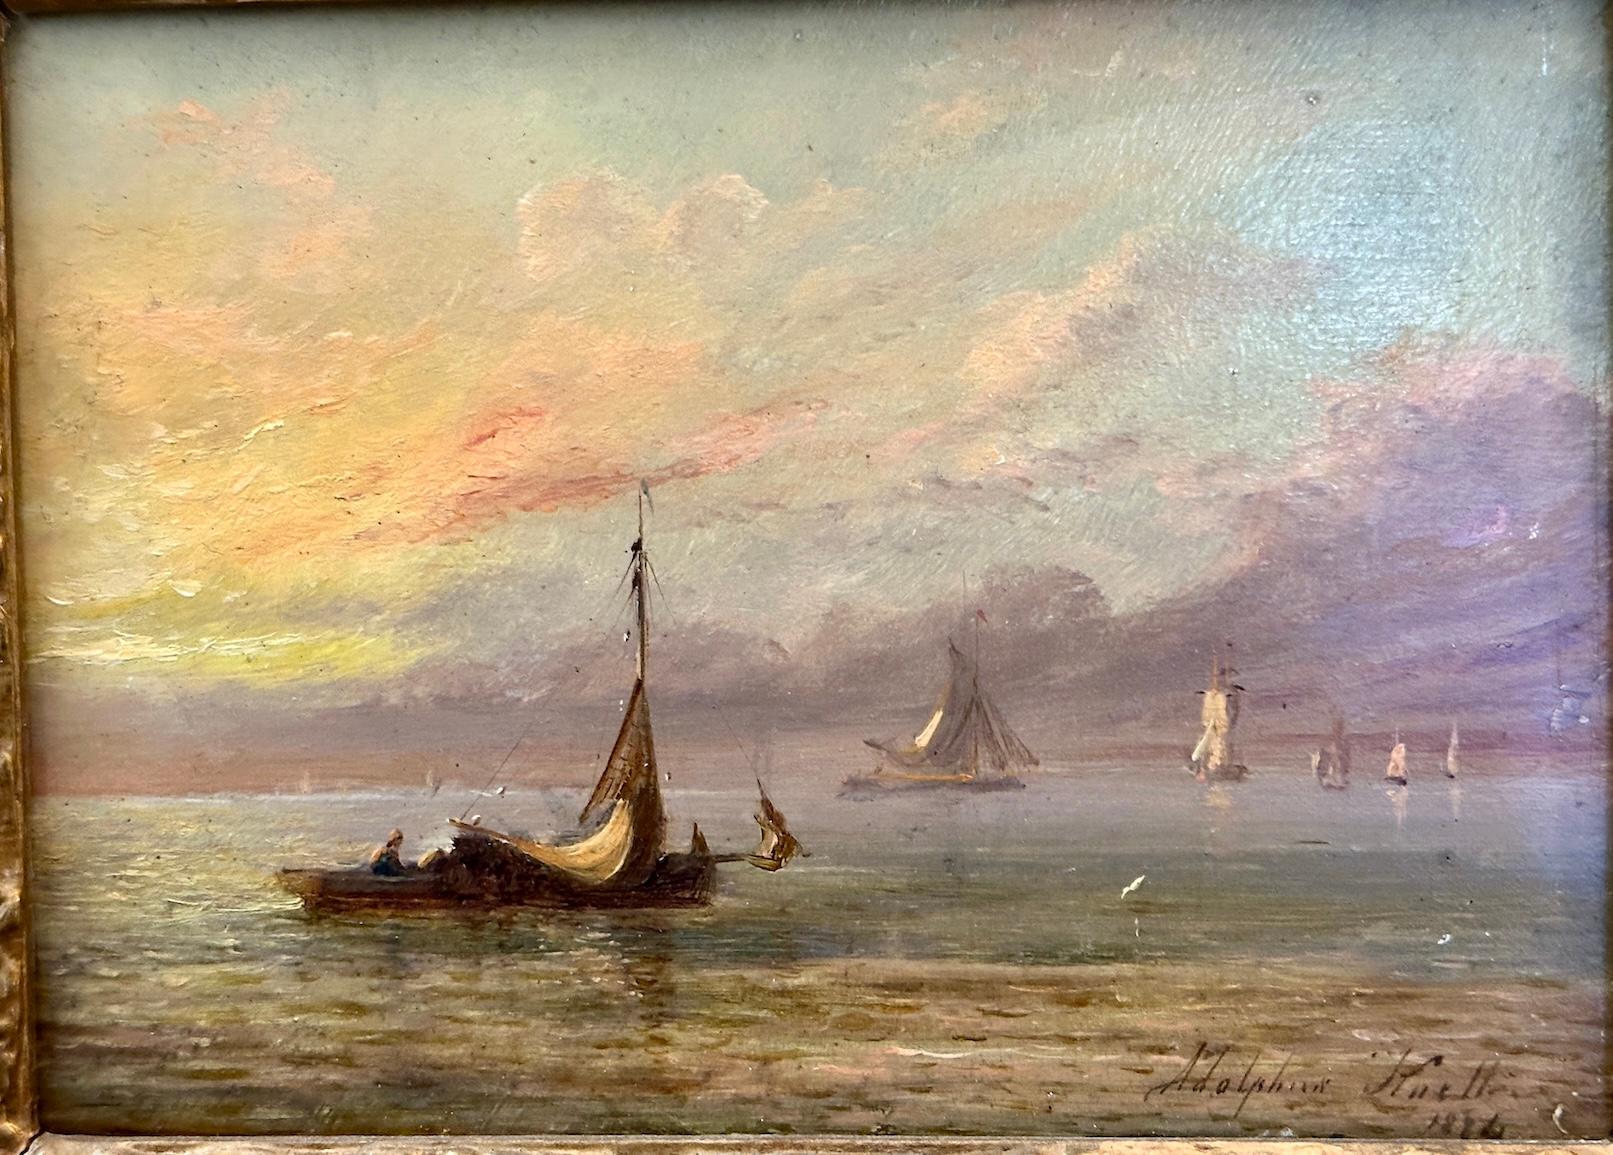 19th century English Fishing boat at sea with Sun rise or Sunset - Painting by Adolphus Knell